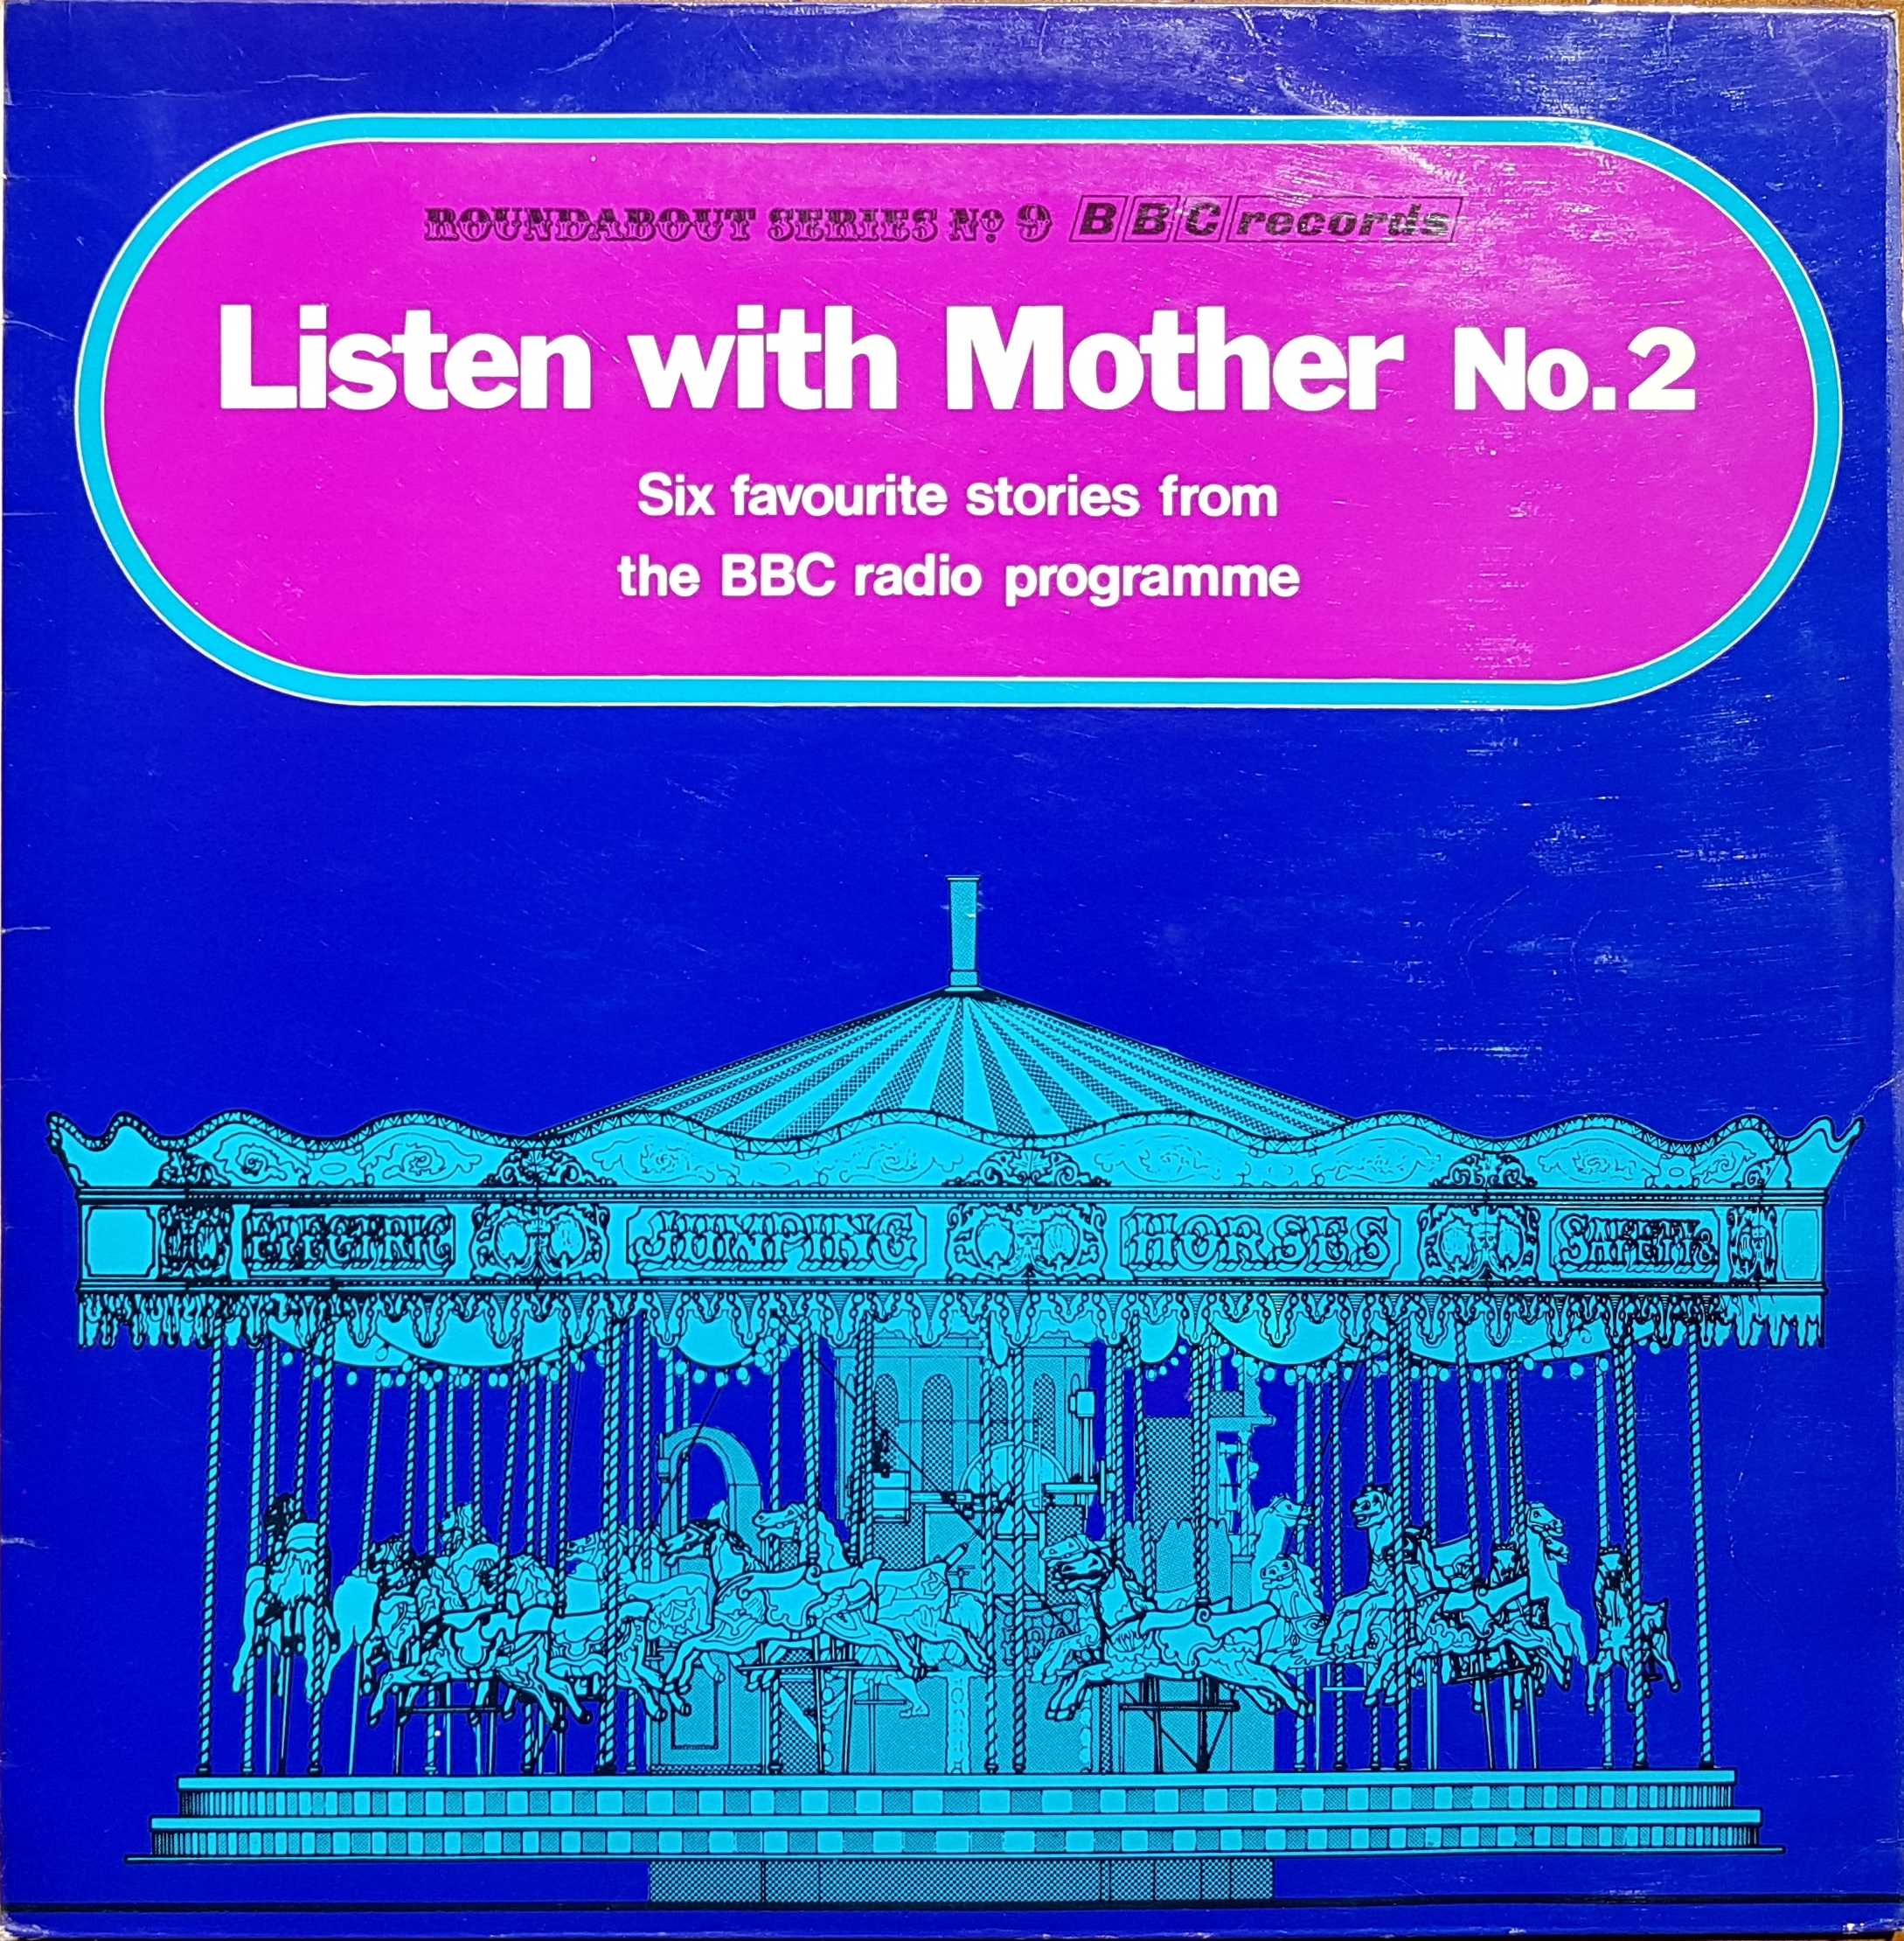 Picture of Listen with mother - Volume 2 by artist Daphne Oxenford / Dorothy Smith from the BBC albums - Records and Tapes library